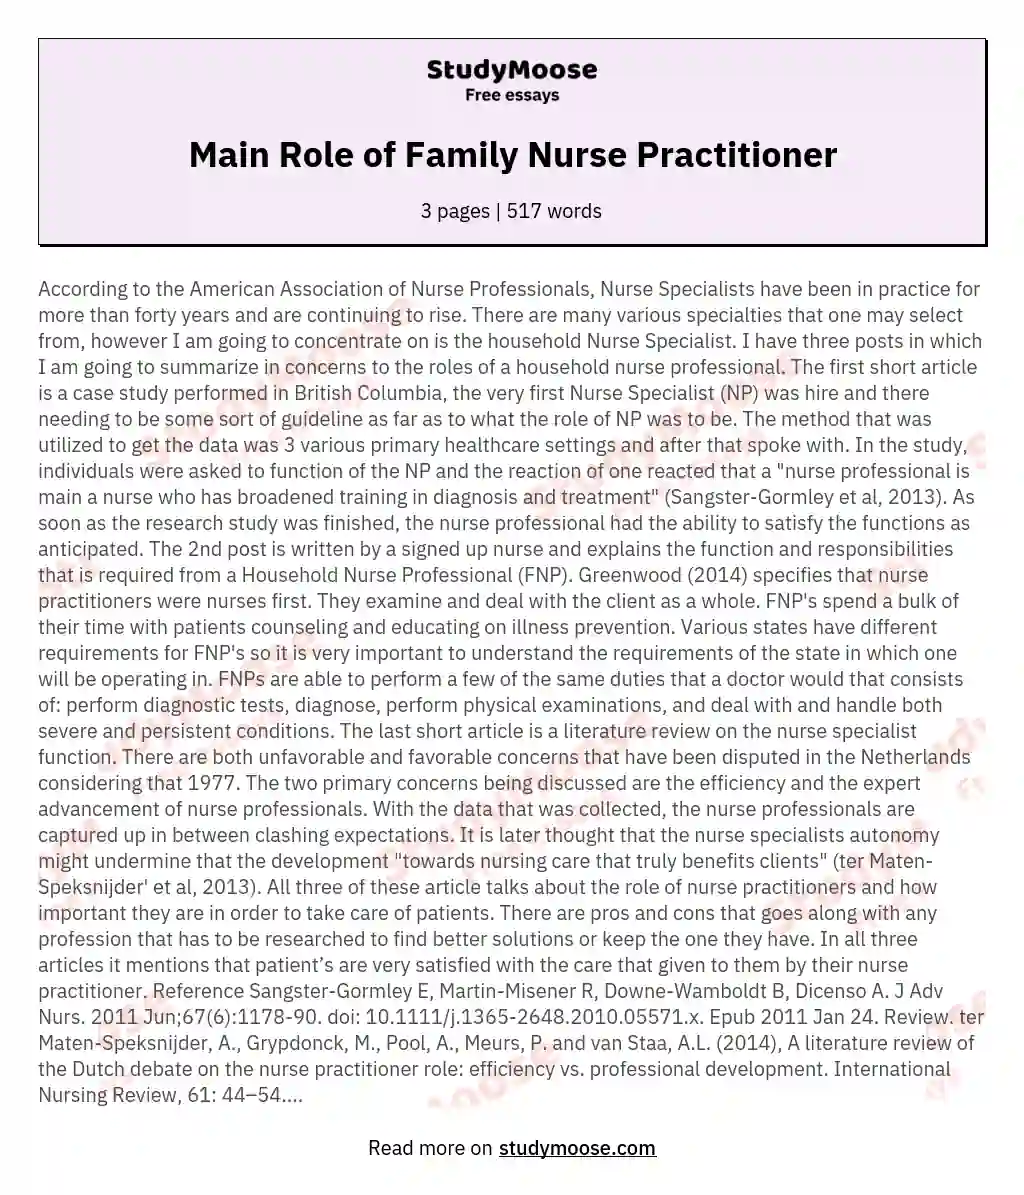 Main Role of Family Nurse Practitioner essay